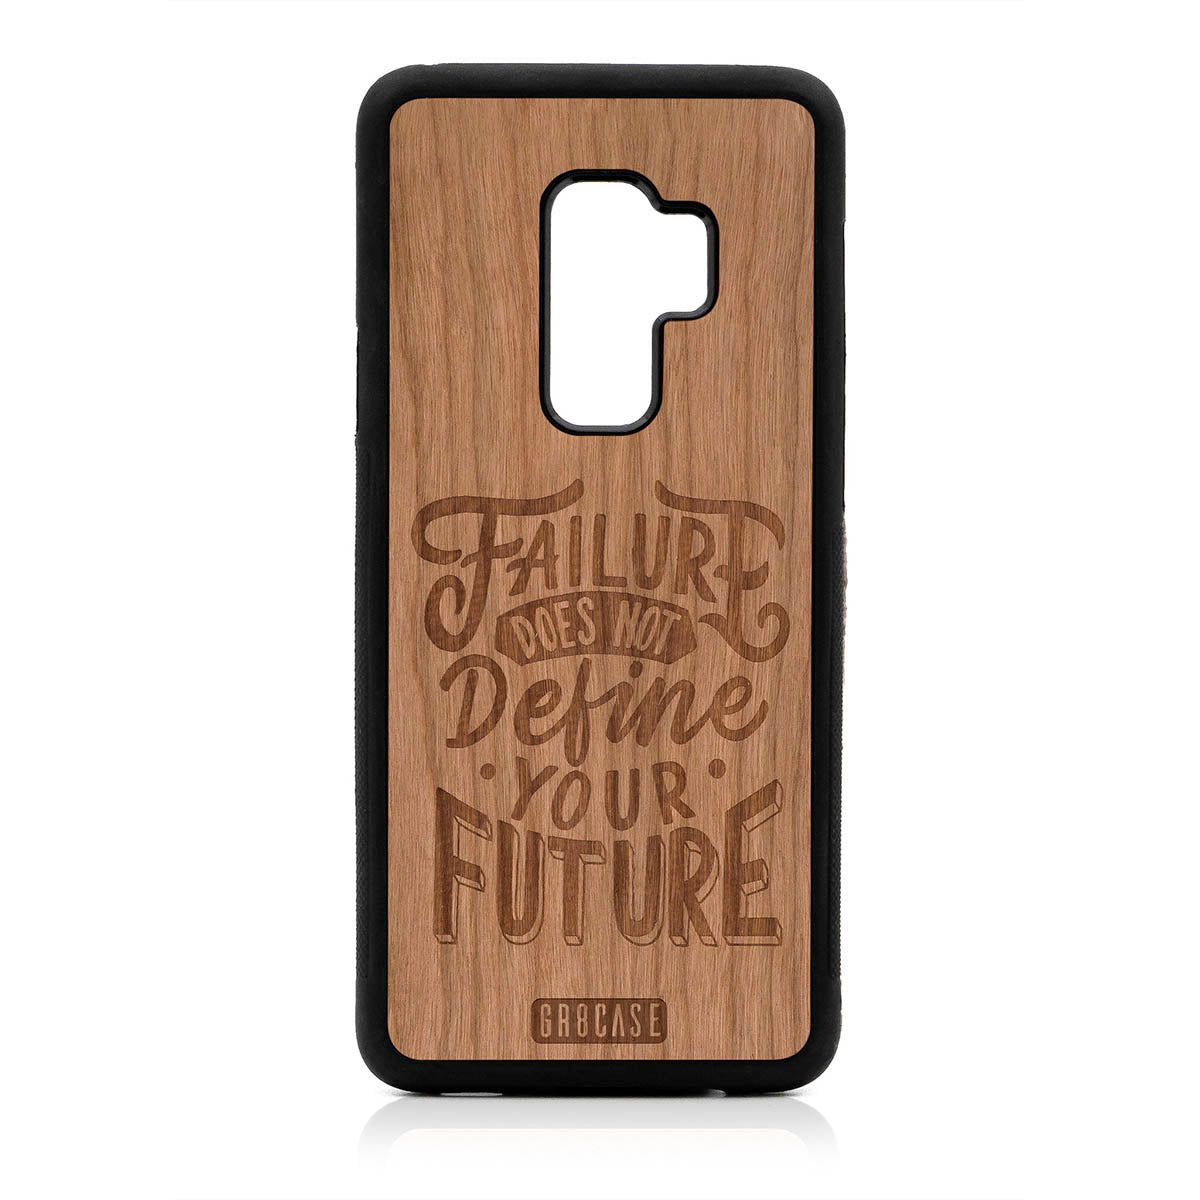 Failure Does Not Define You Future Design Wood Case For Samsung Galaxy S9 Plus by GR8CASE